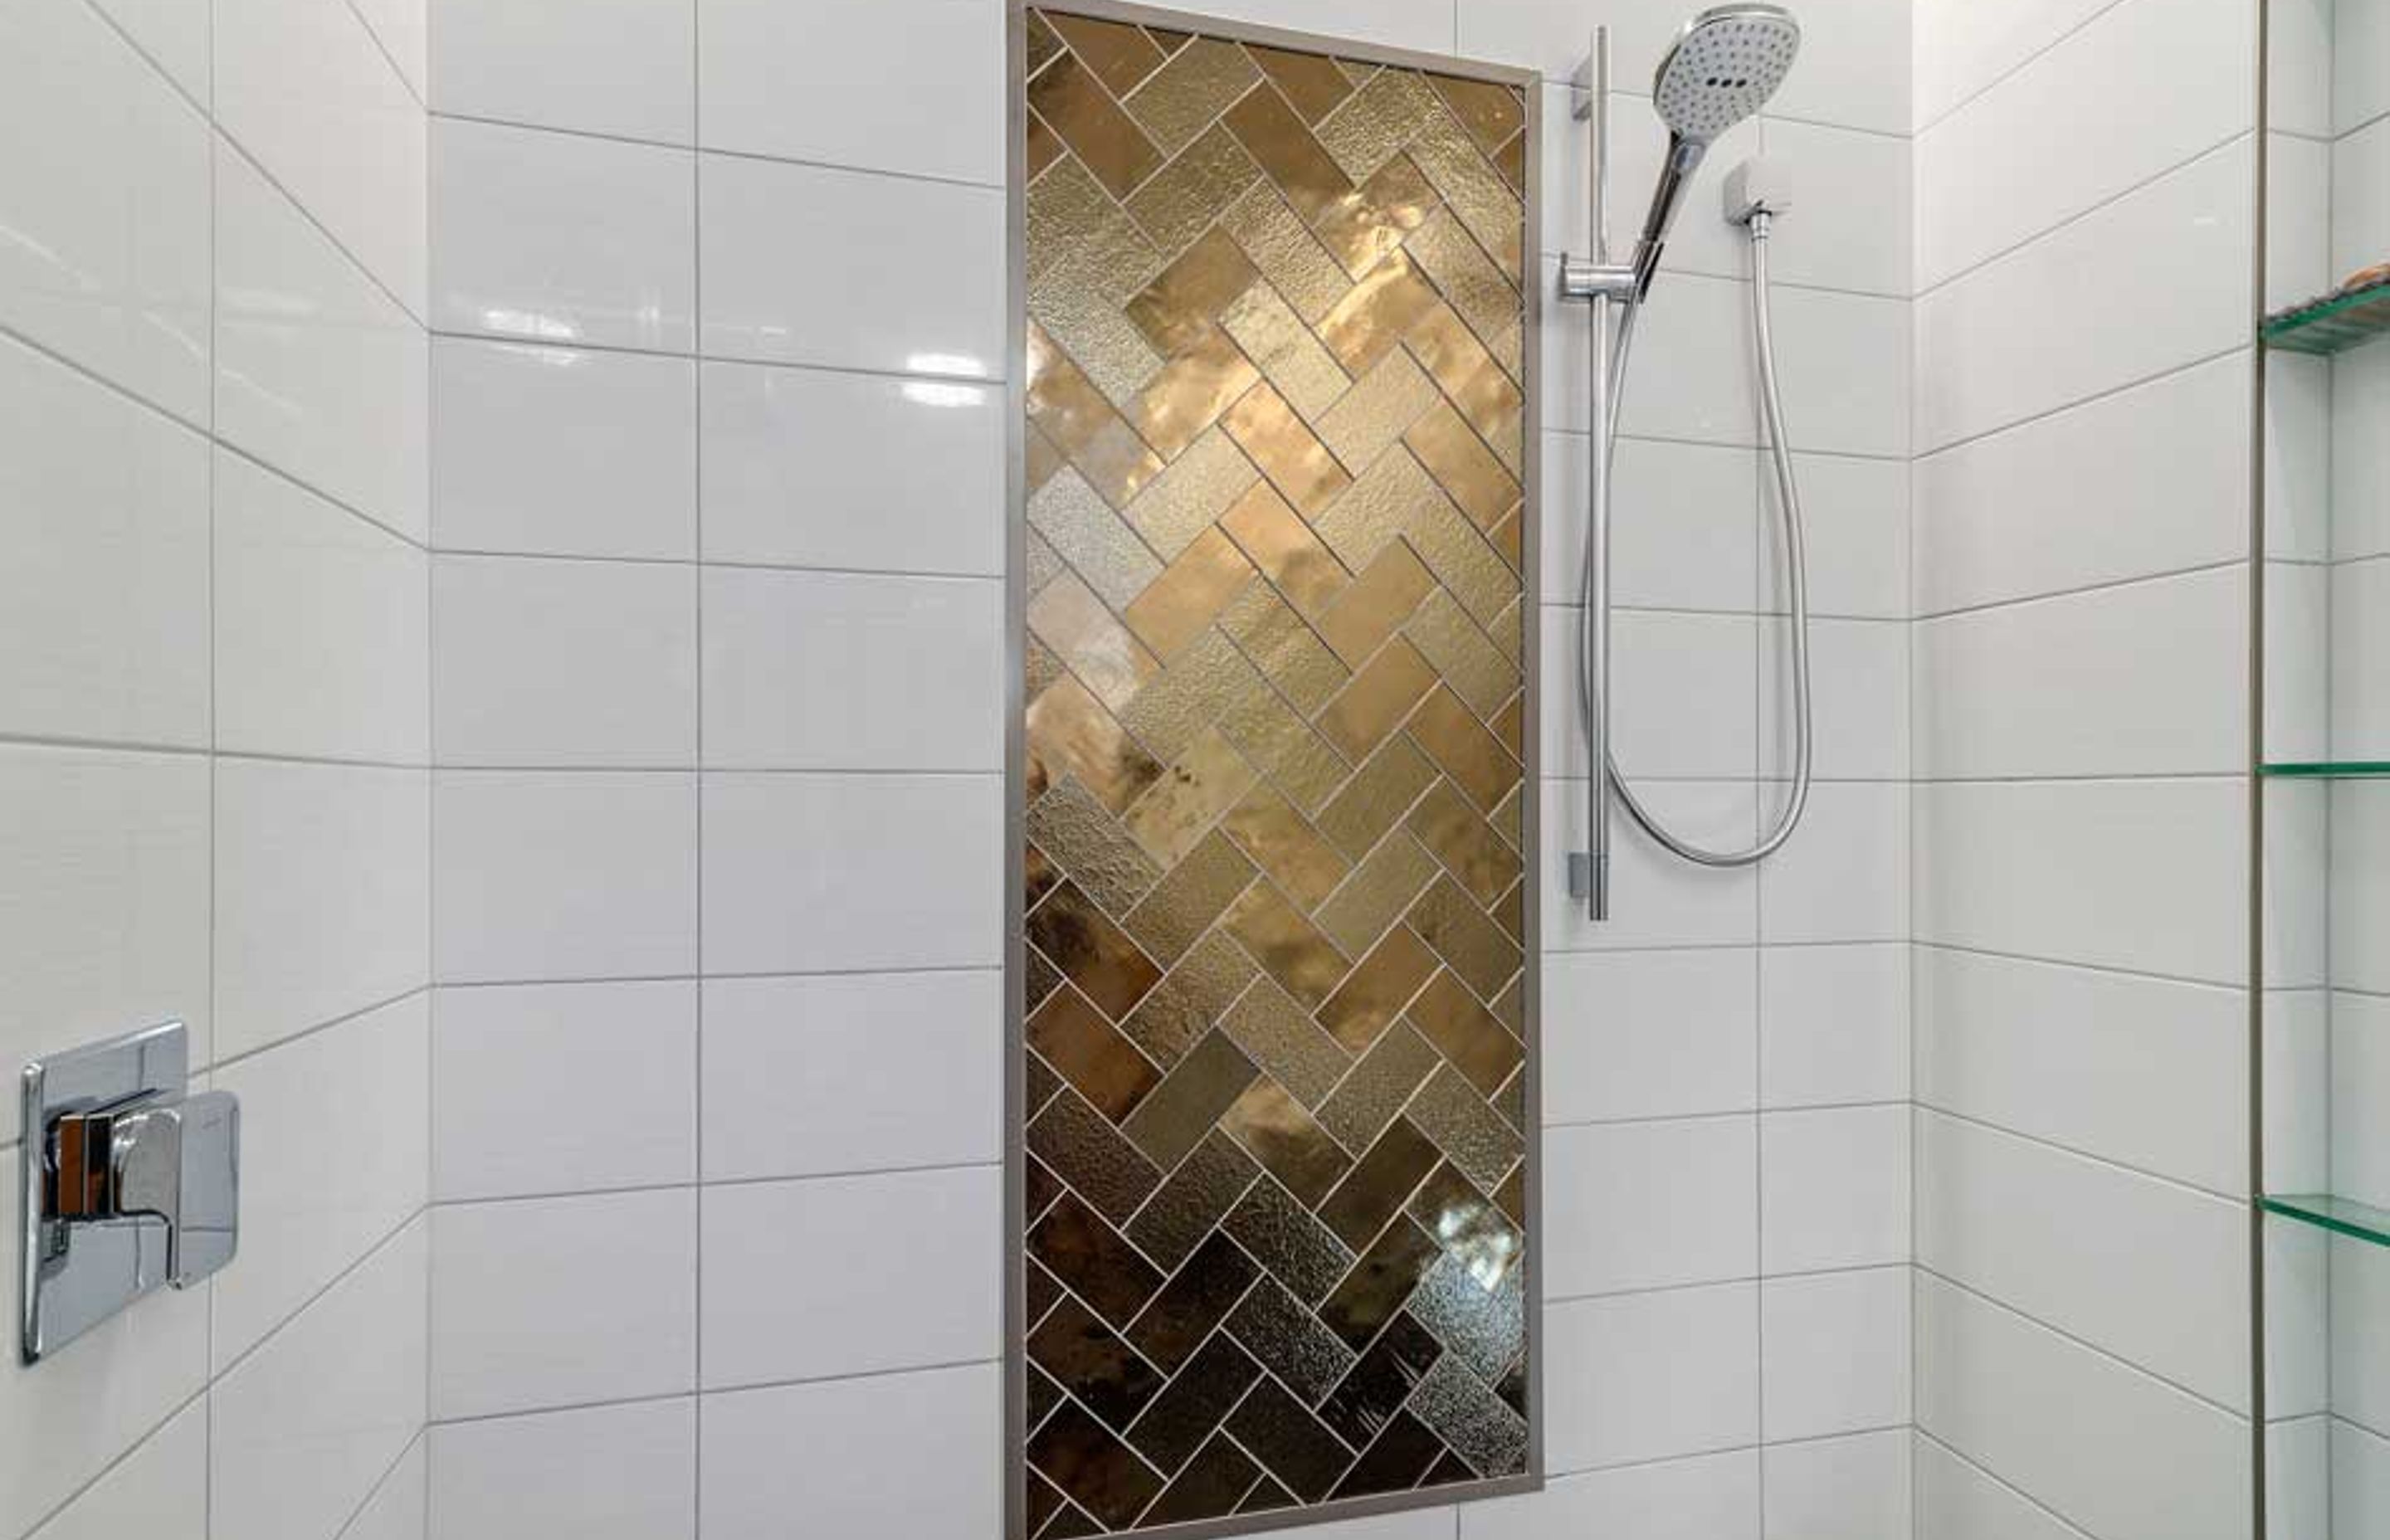 These bronze glass tiles are definitely a feature inside this double shower - and the herringbone pattern adds interest